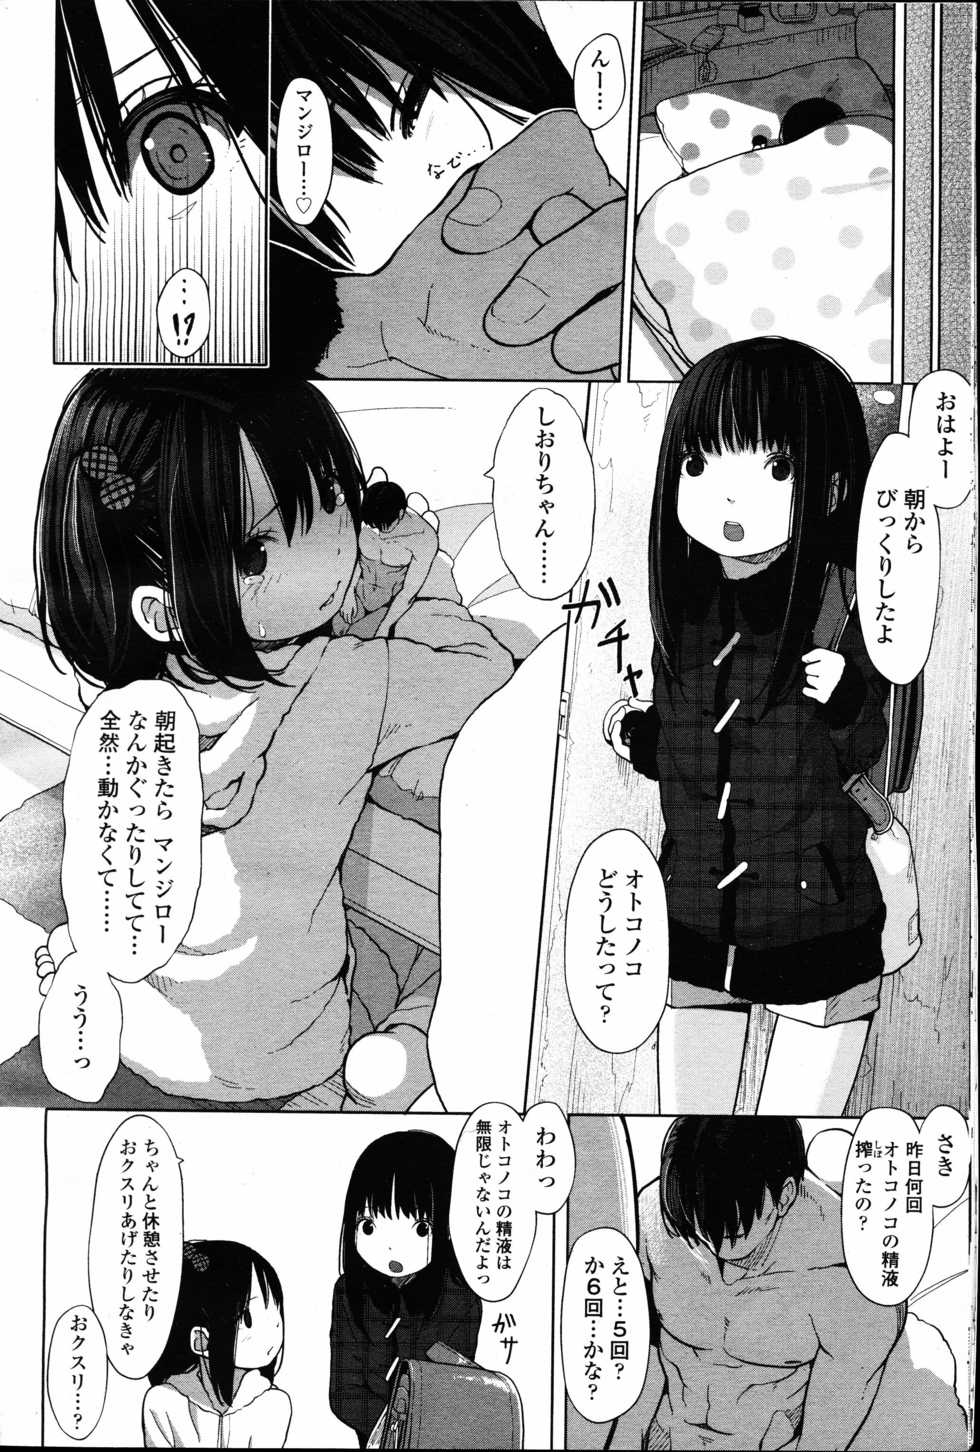 Girls forM Vol. 12 - Page 23